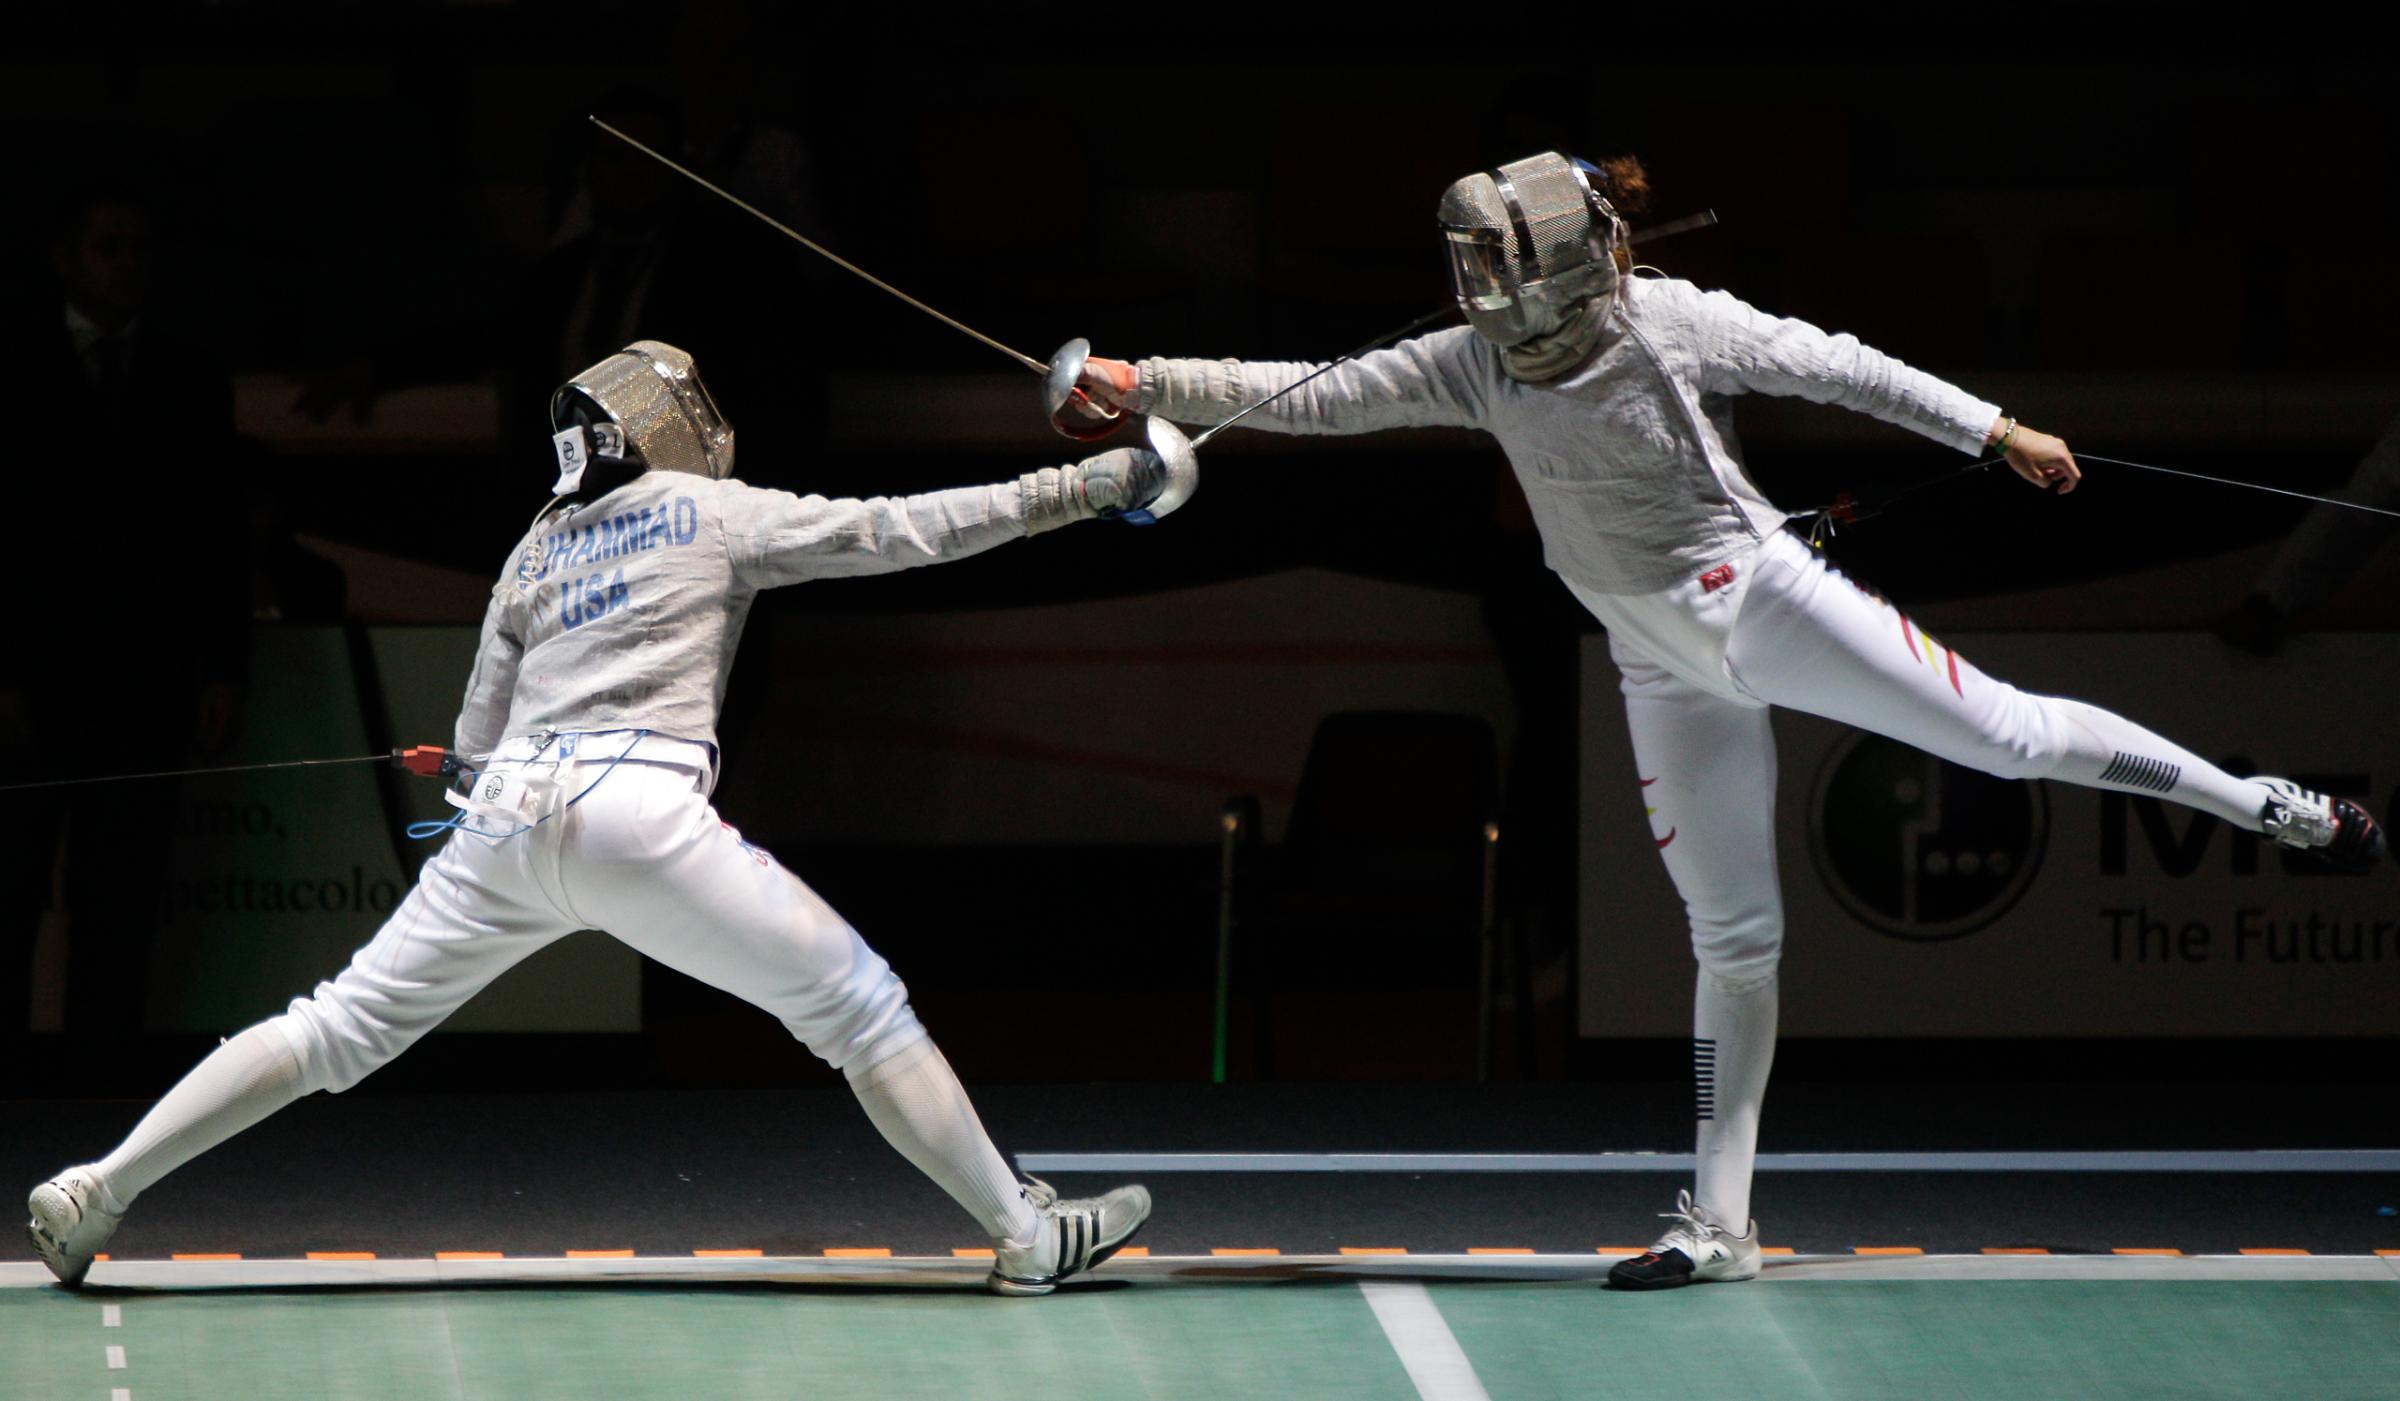 Ibtihaj Muhammad—Muhammad picked up fencing in eighth grade in part because the body-length attire accommodated her Muslim faith. The Duke grad will be the first American Olympian to compete in a hijab.